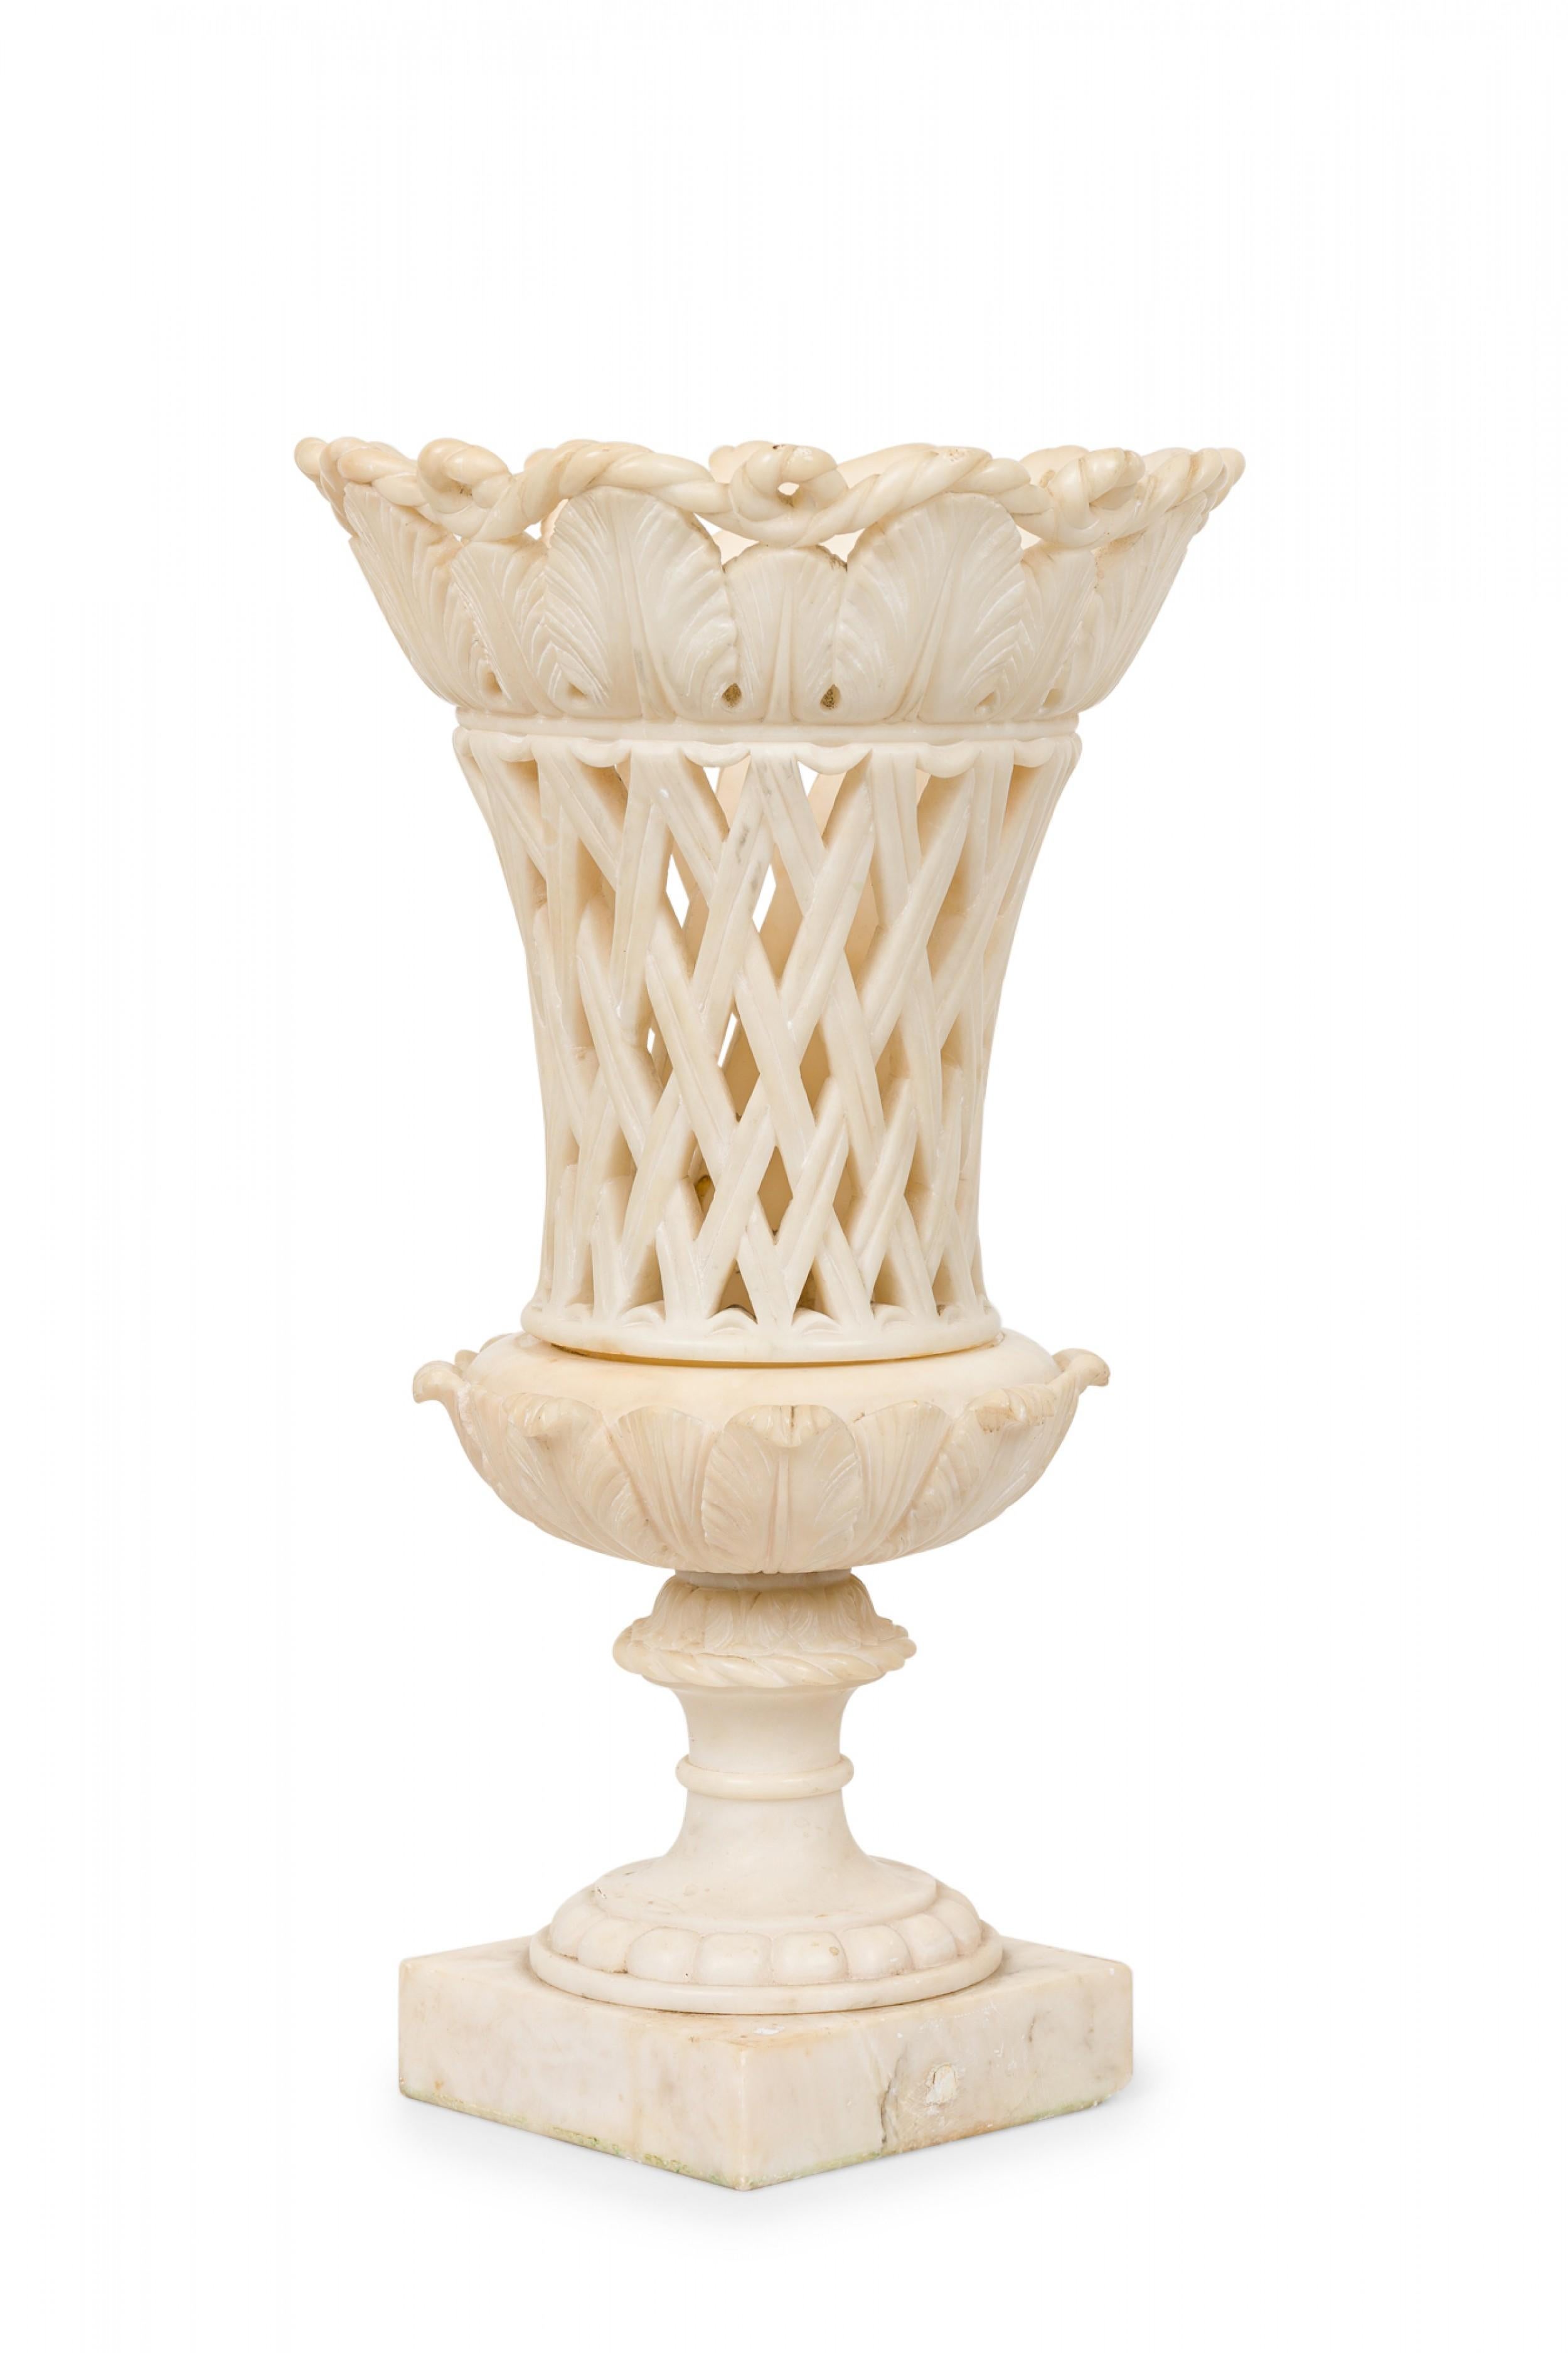 Italian Neo-Classic Grand Tour white marble centerpiece in an urn form with a rope and foliate design lip and diamond reticulated body, resting on a square white marble base.